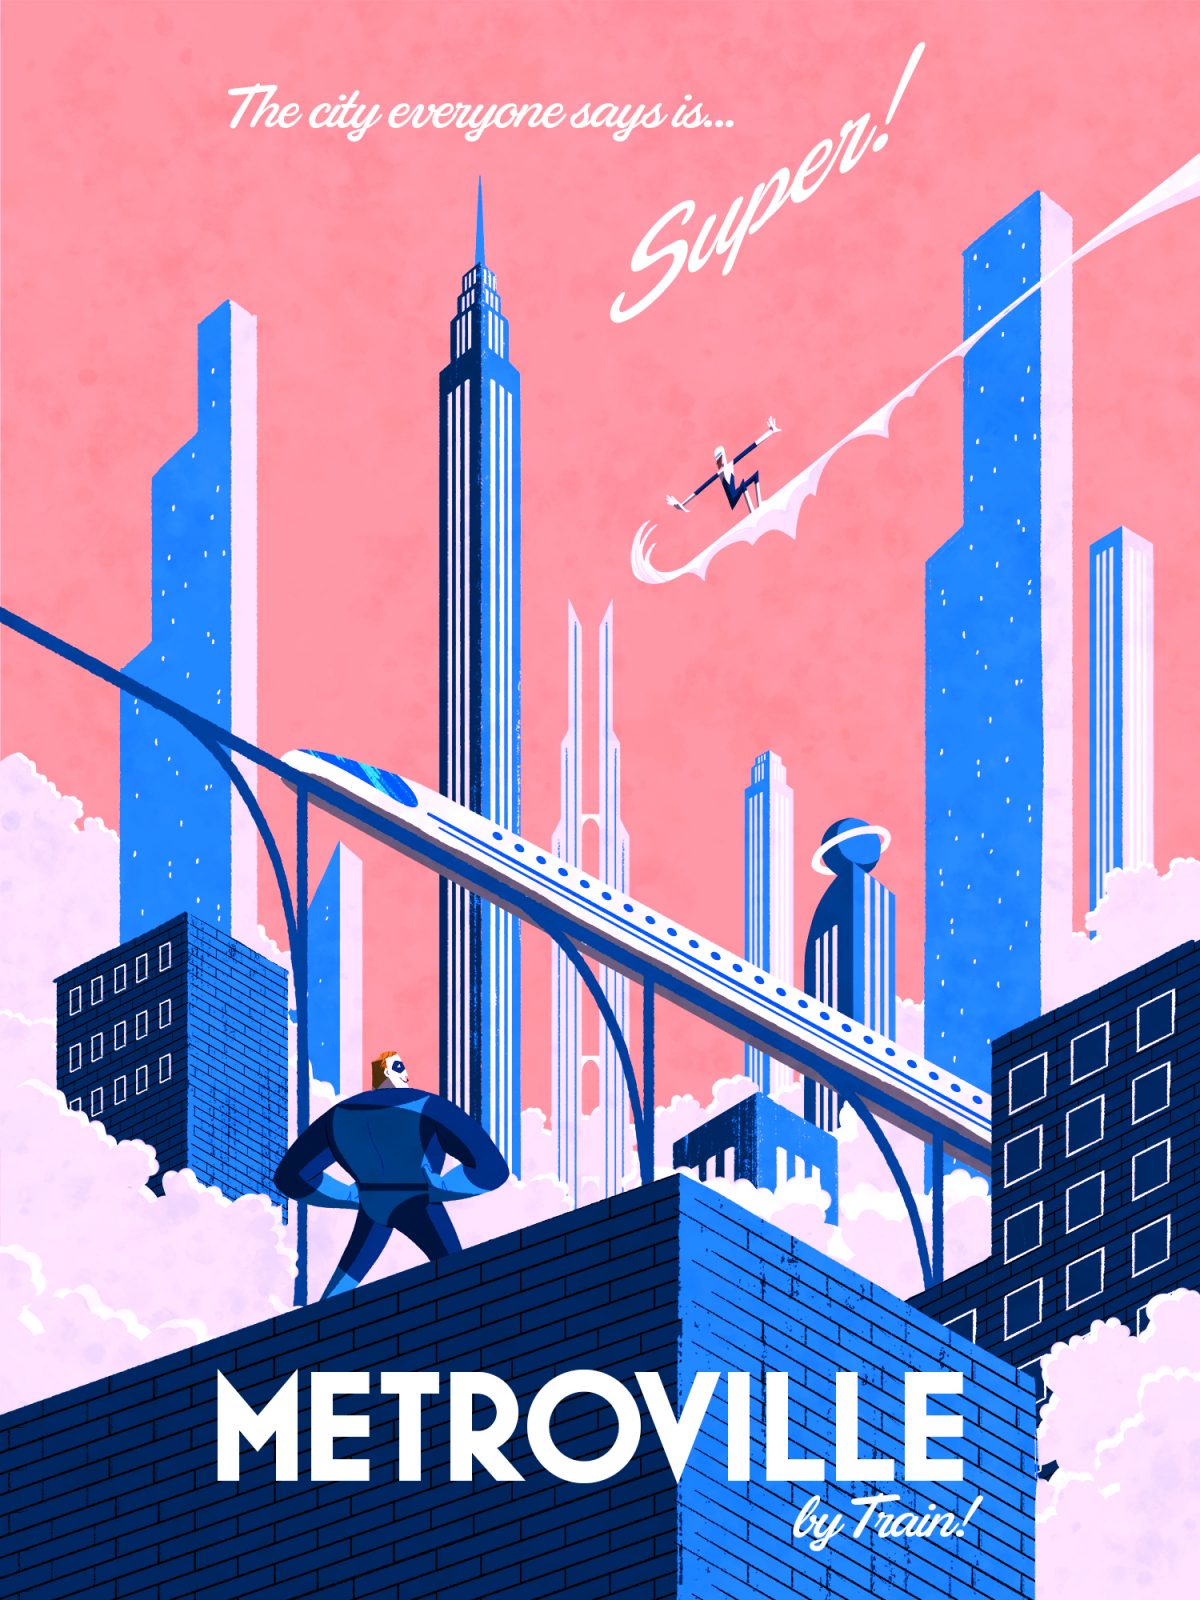 The Incredibles - Metroville Travel Poster - PosterSpy